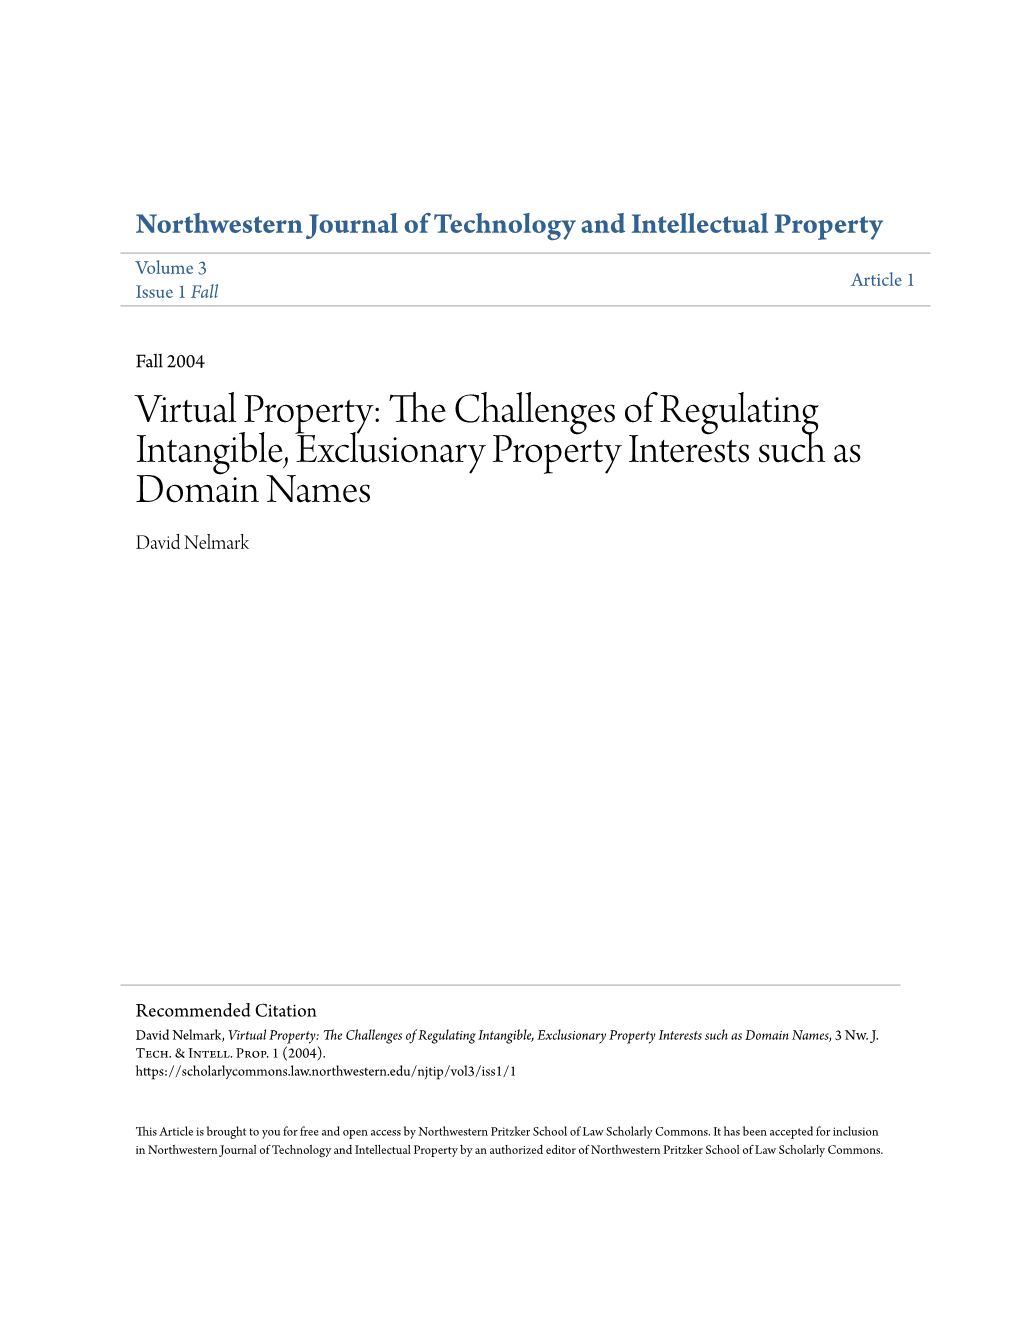 Virtual Property: the Hc Allenges of Regulating Intangible, Exclusionary Property Interests Such As Domain Names David Nelmark